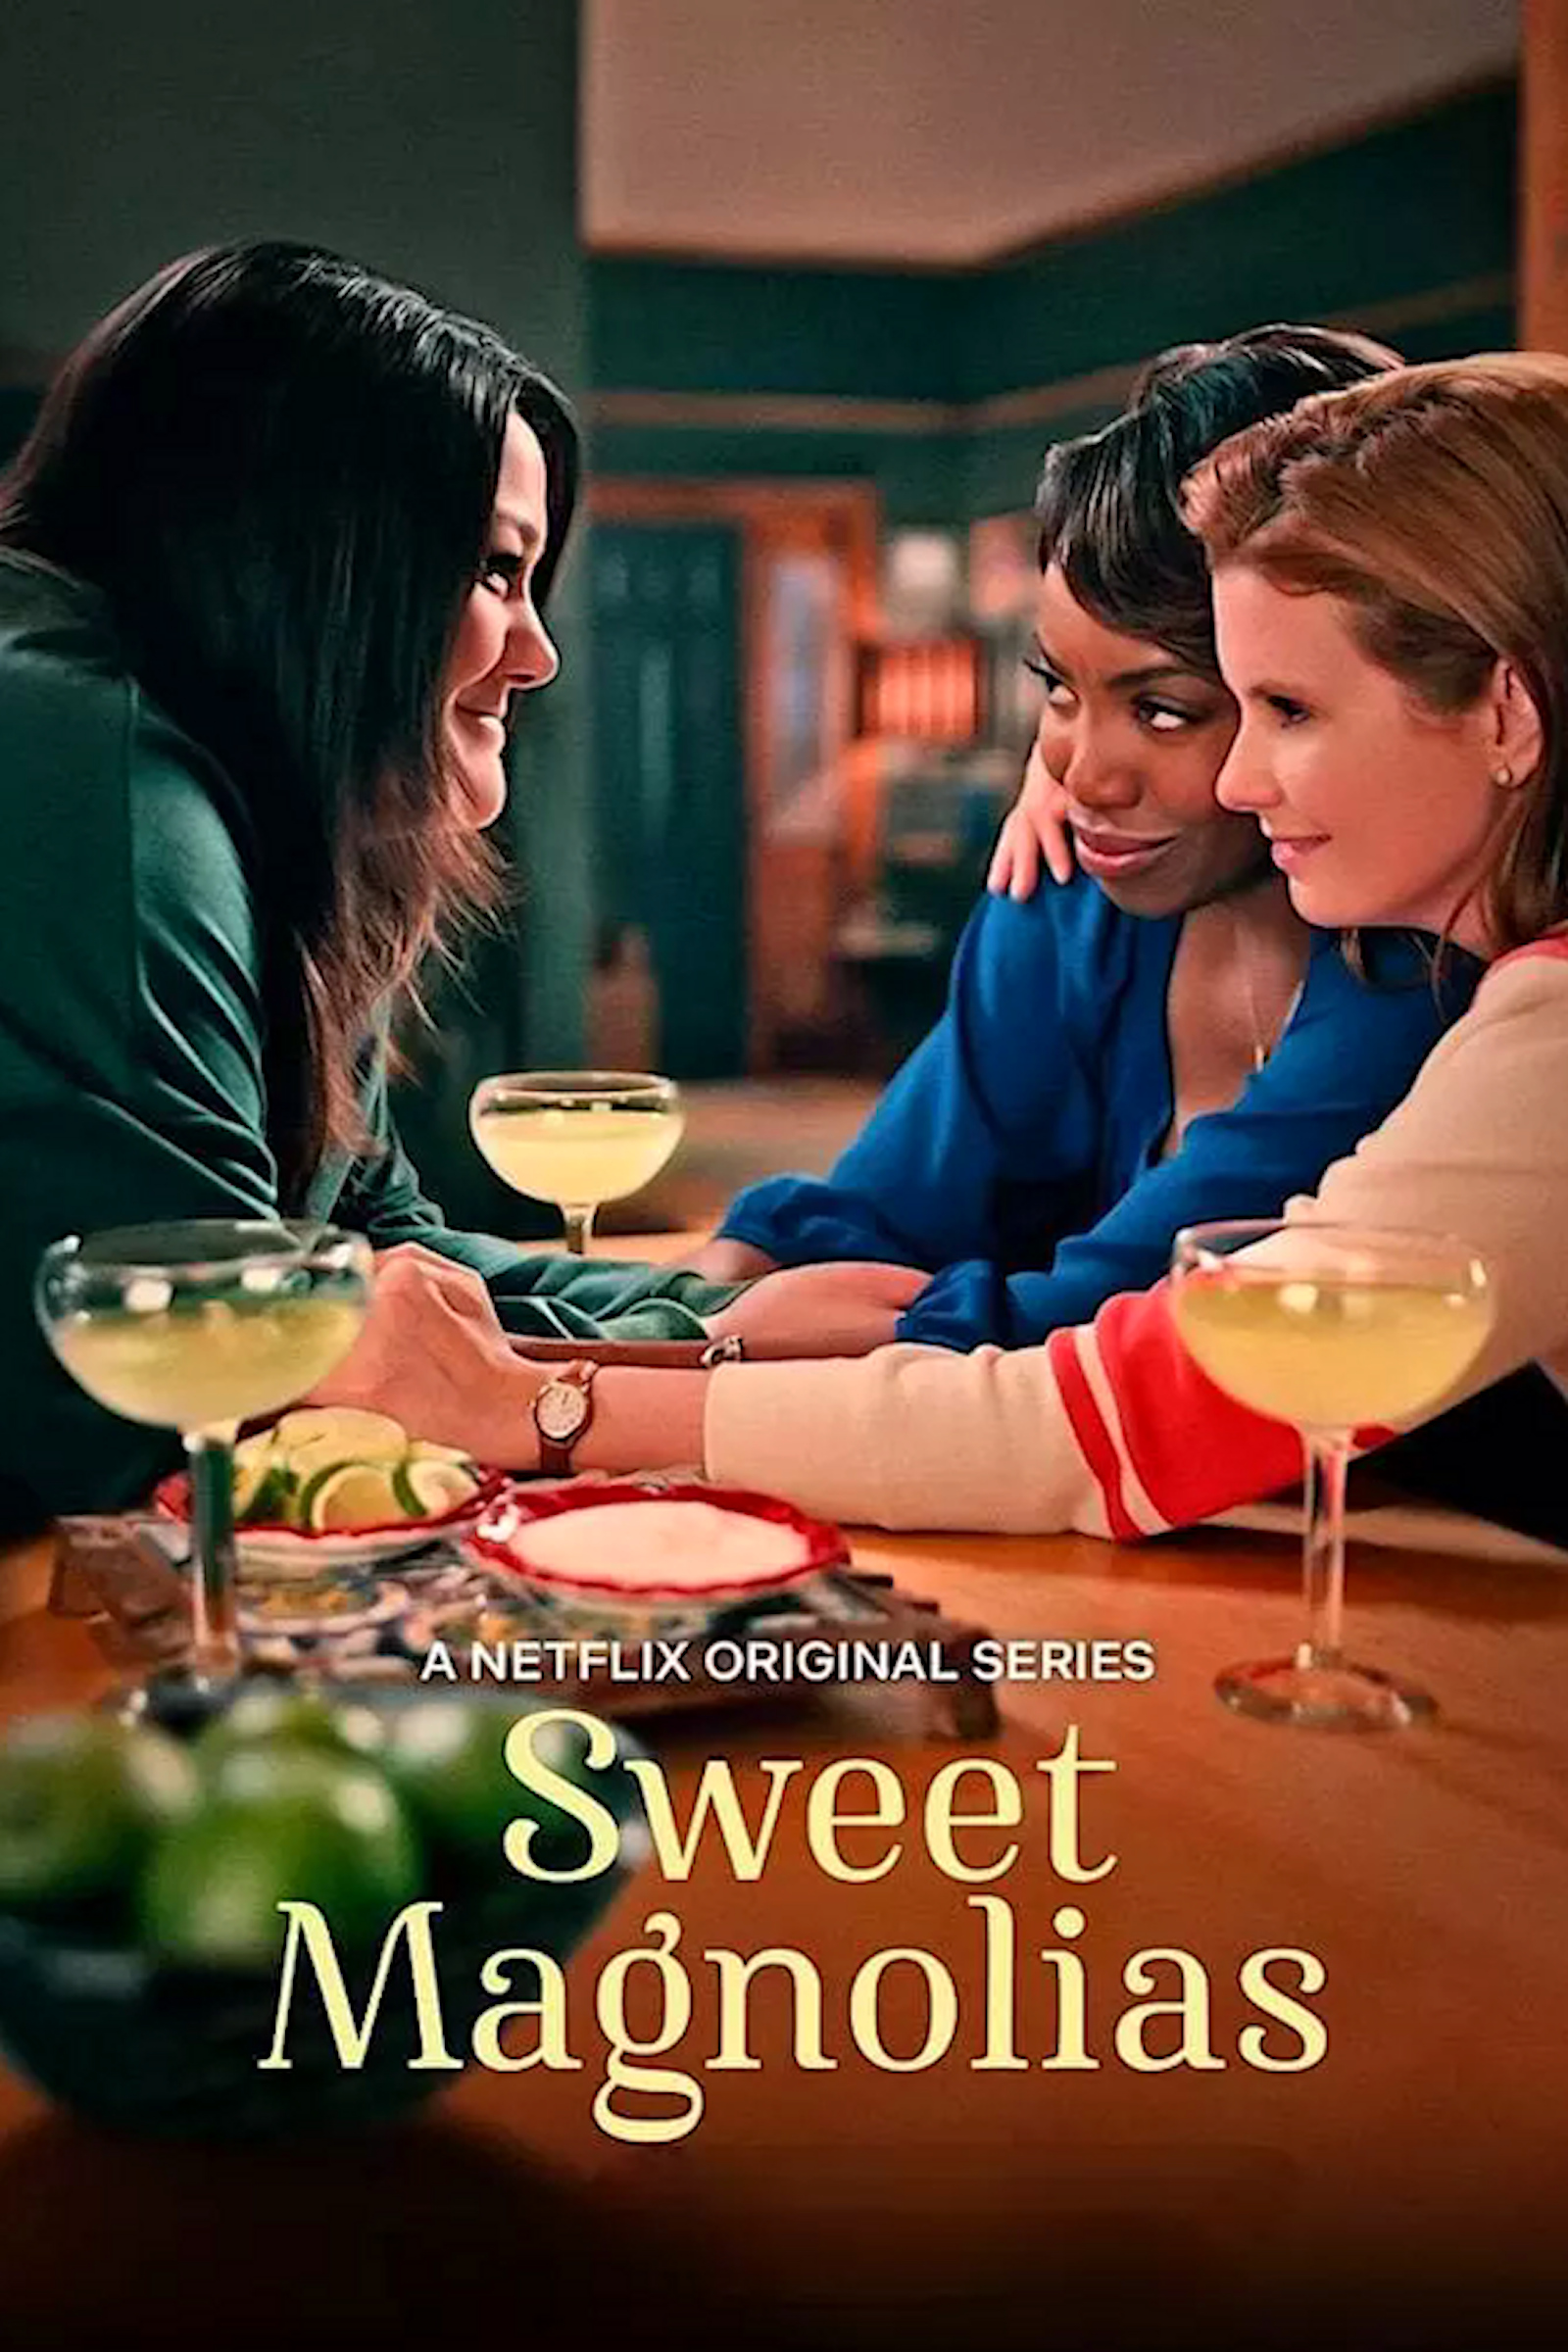 Sweet Magnolias Cover: 3 friends sit around a table drinking margaritas